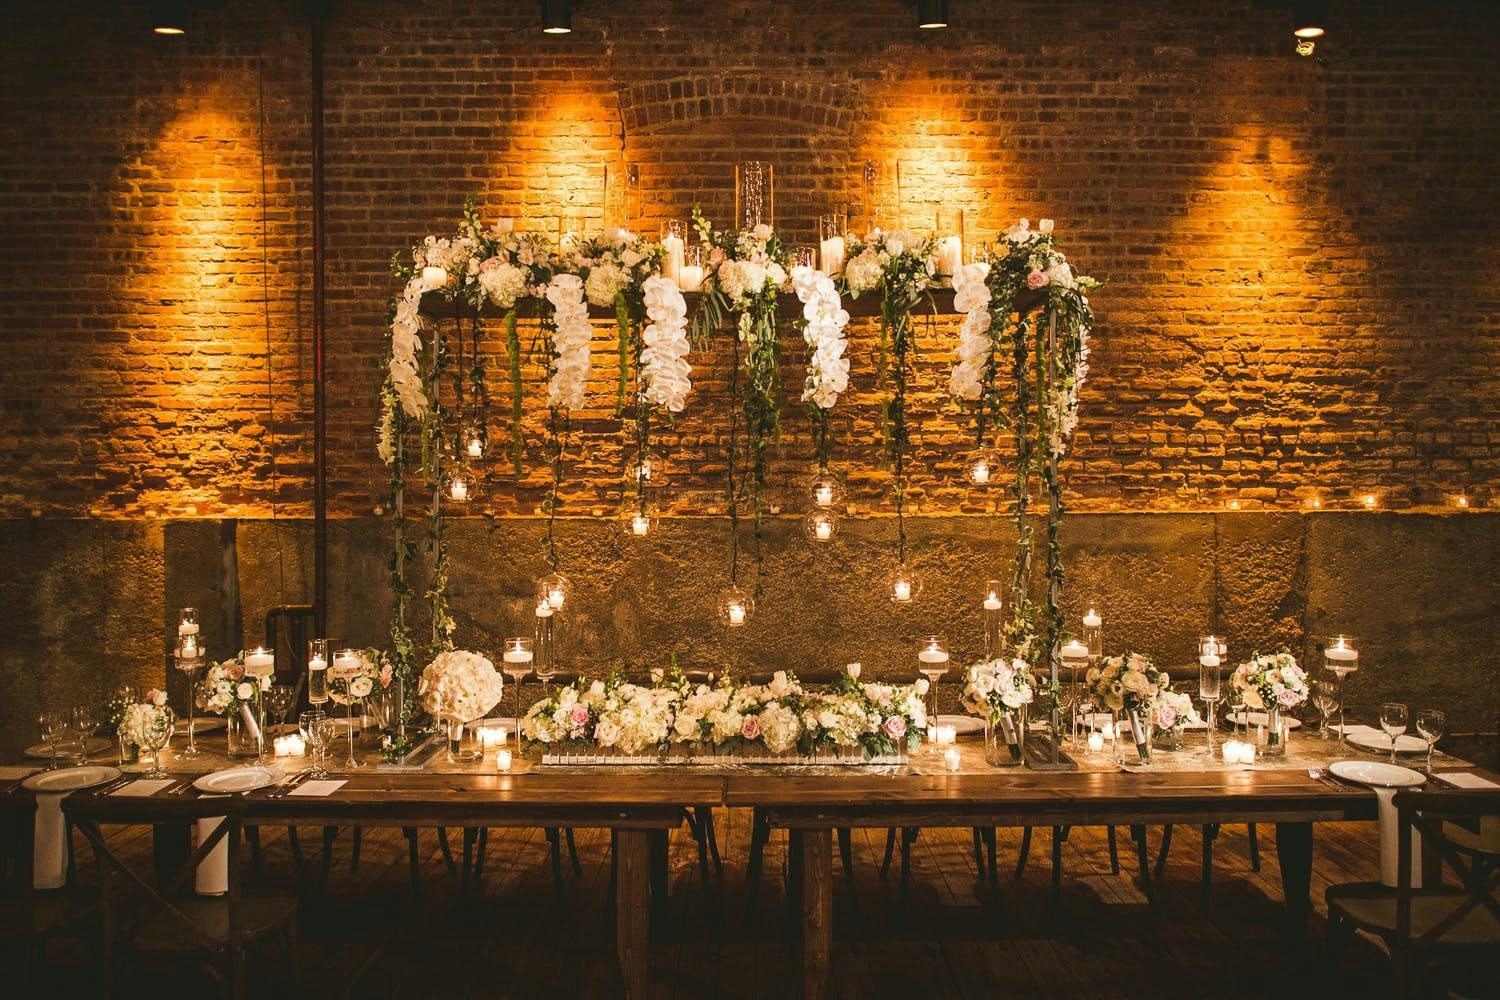 Industrial rustic winter wedding centerpieces with greenery and white orchids | PartySlate